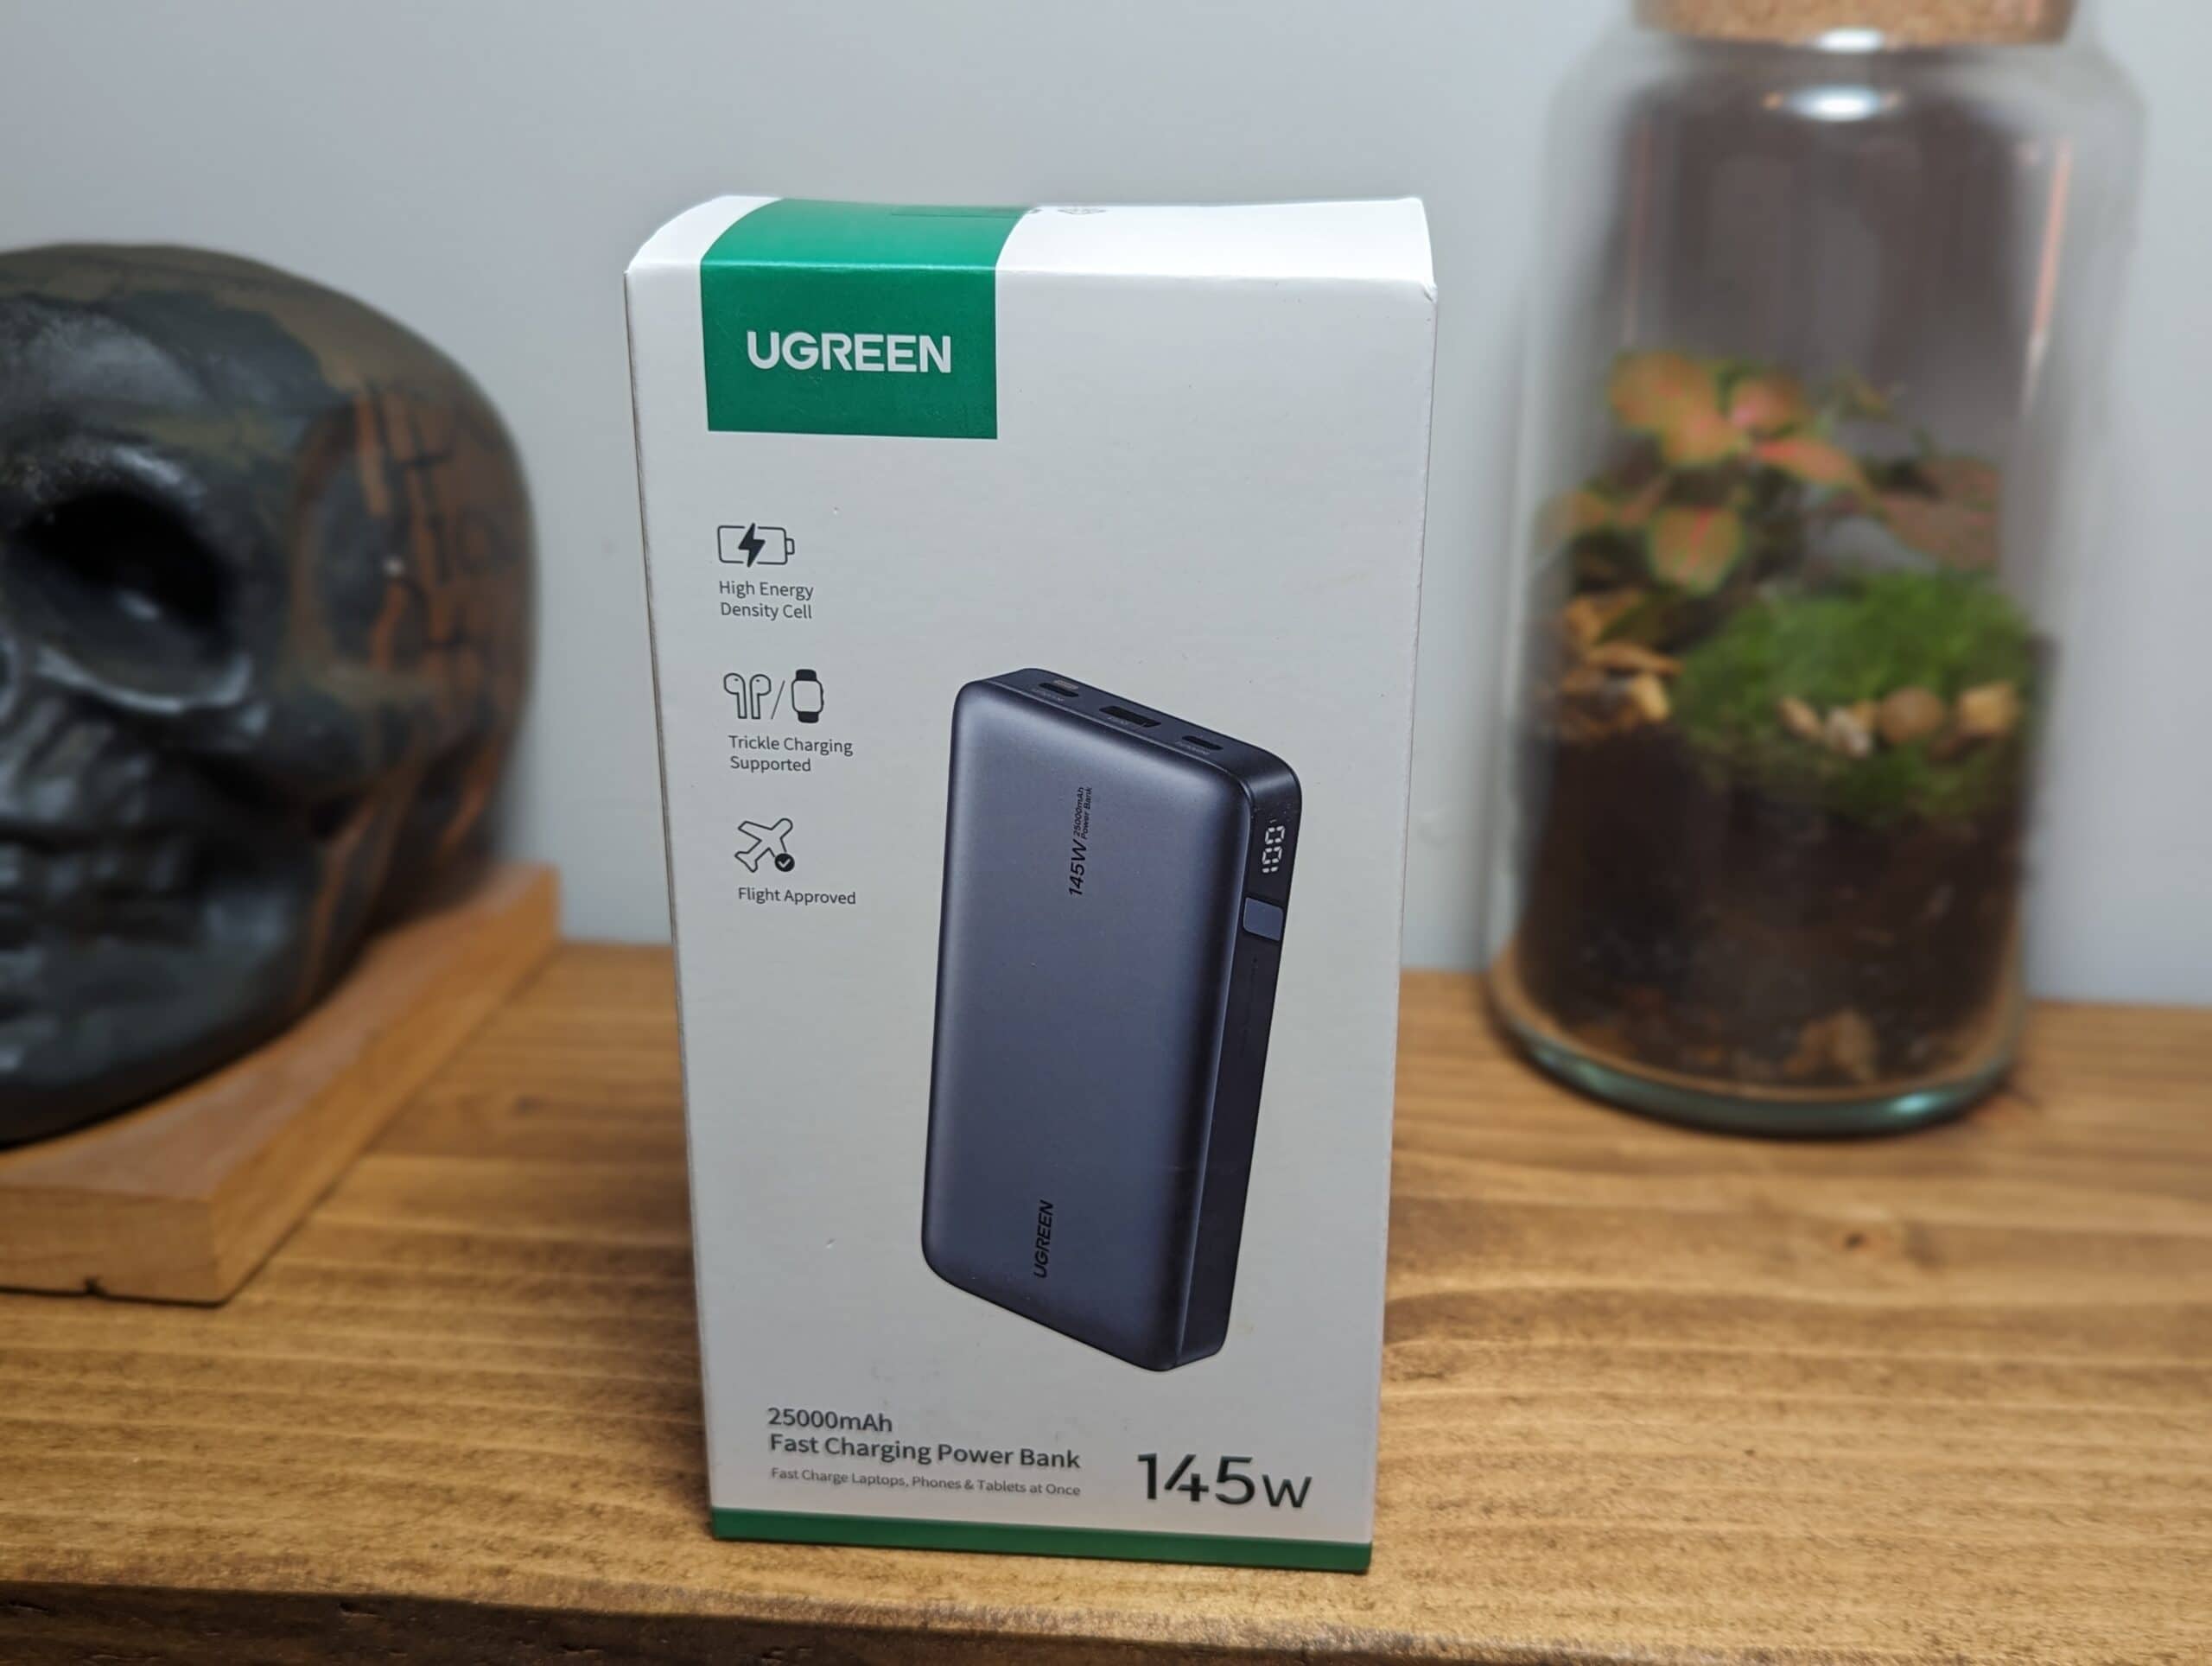 Ugreen 145W Power Bank review: Portable powerhouse solution - General  Discussion Discussions on AppleInsider Forums